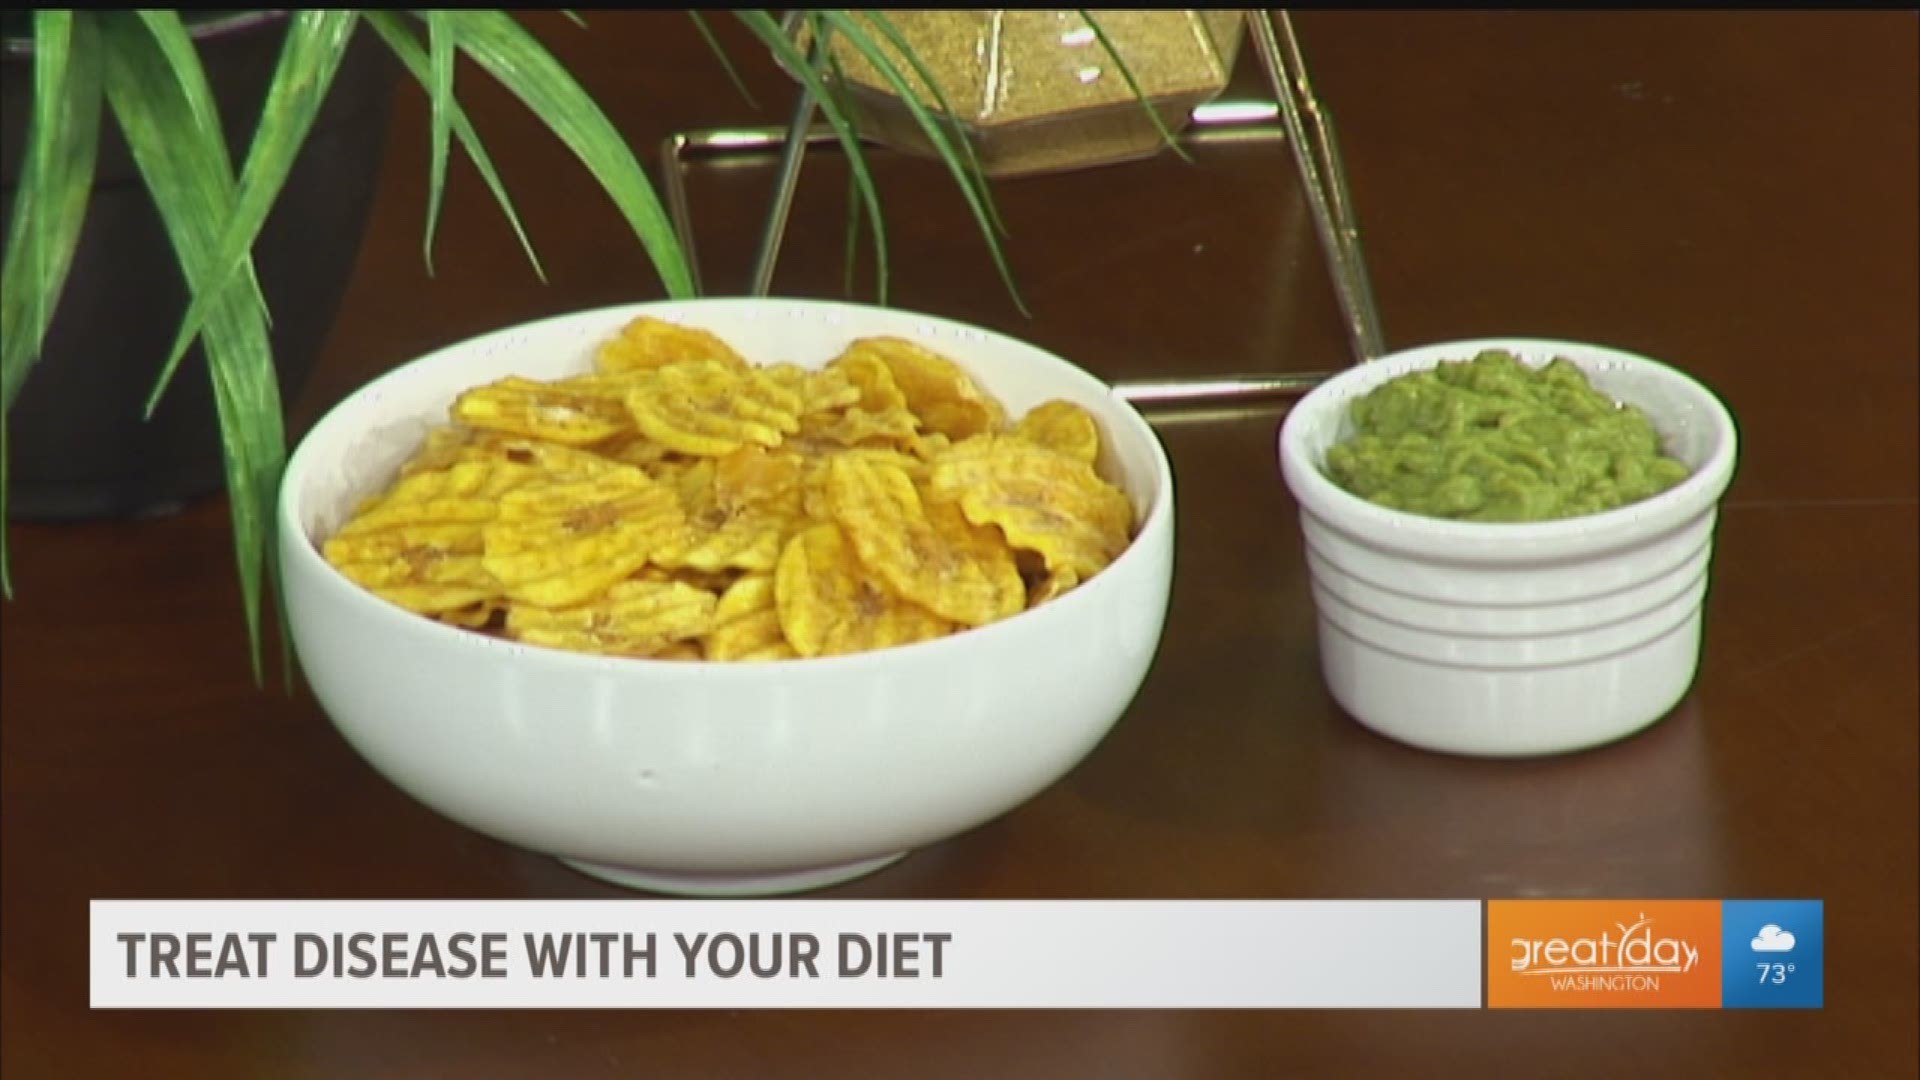 Laura Morrow, from Simply AIP shares how changing your diet can help ease your autoimmune disease.